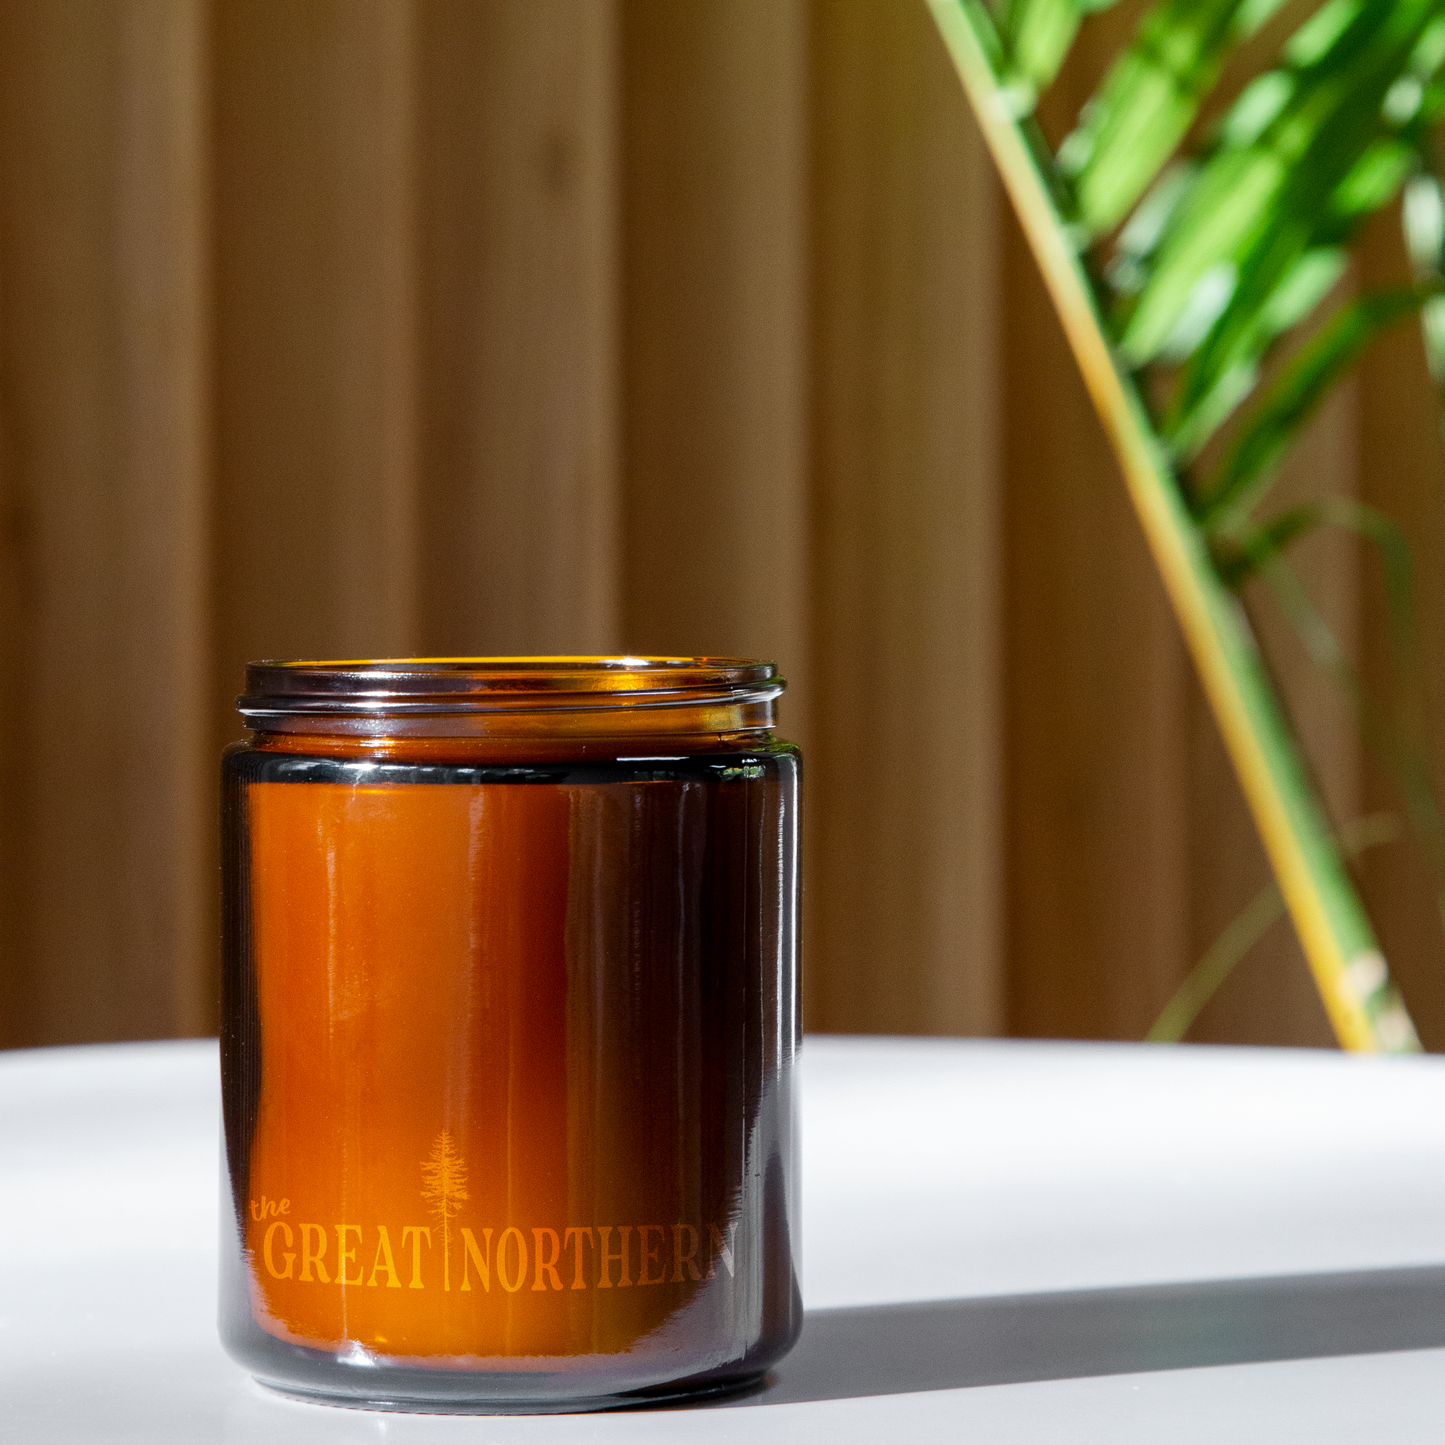 The Great Northern {Amber + Tonka Bean} Candle